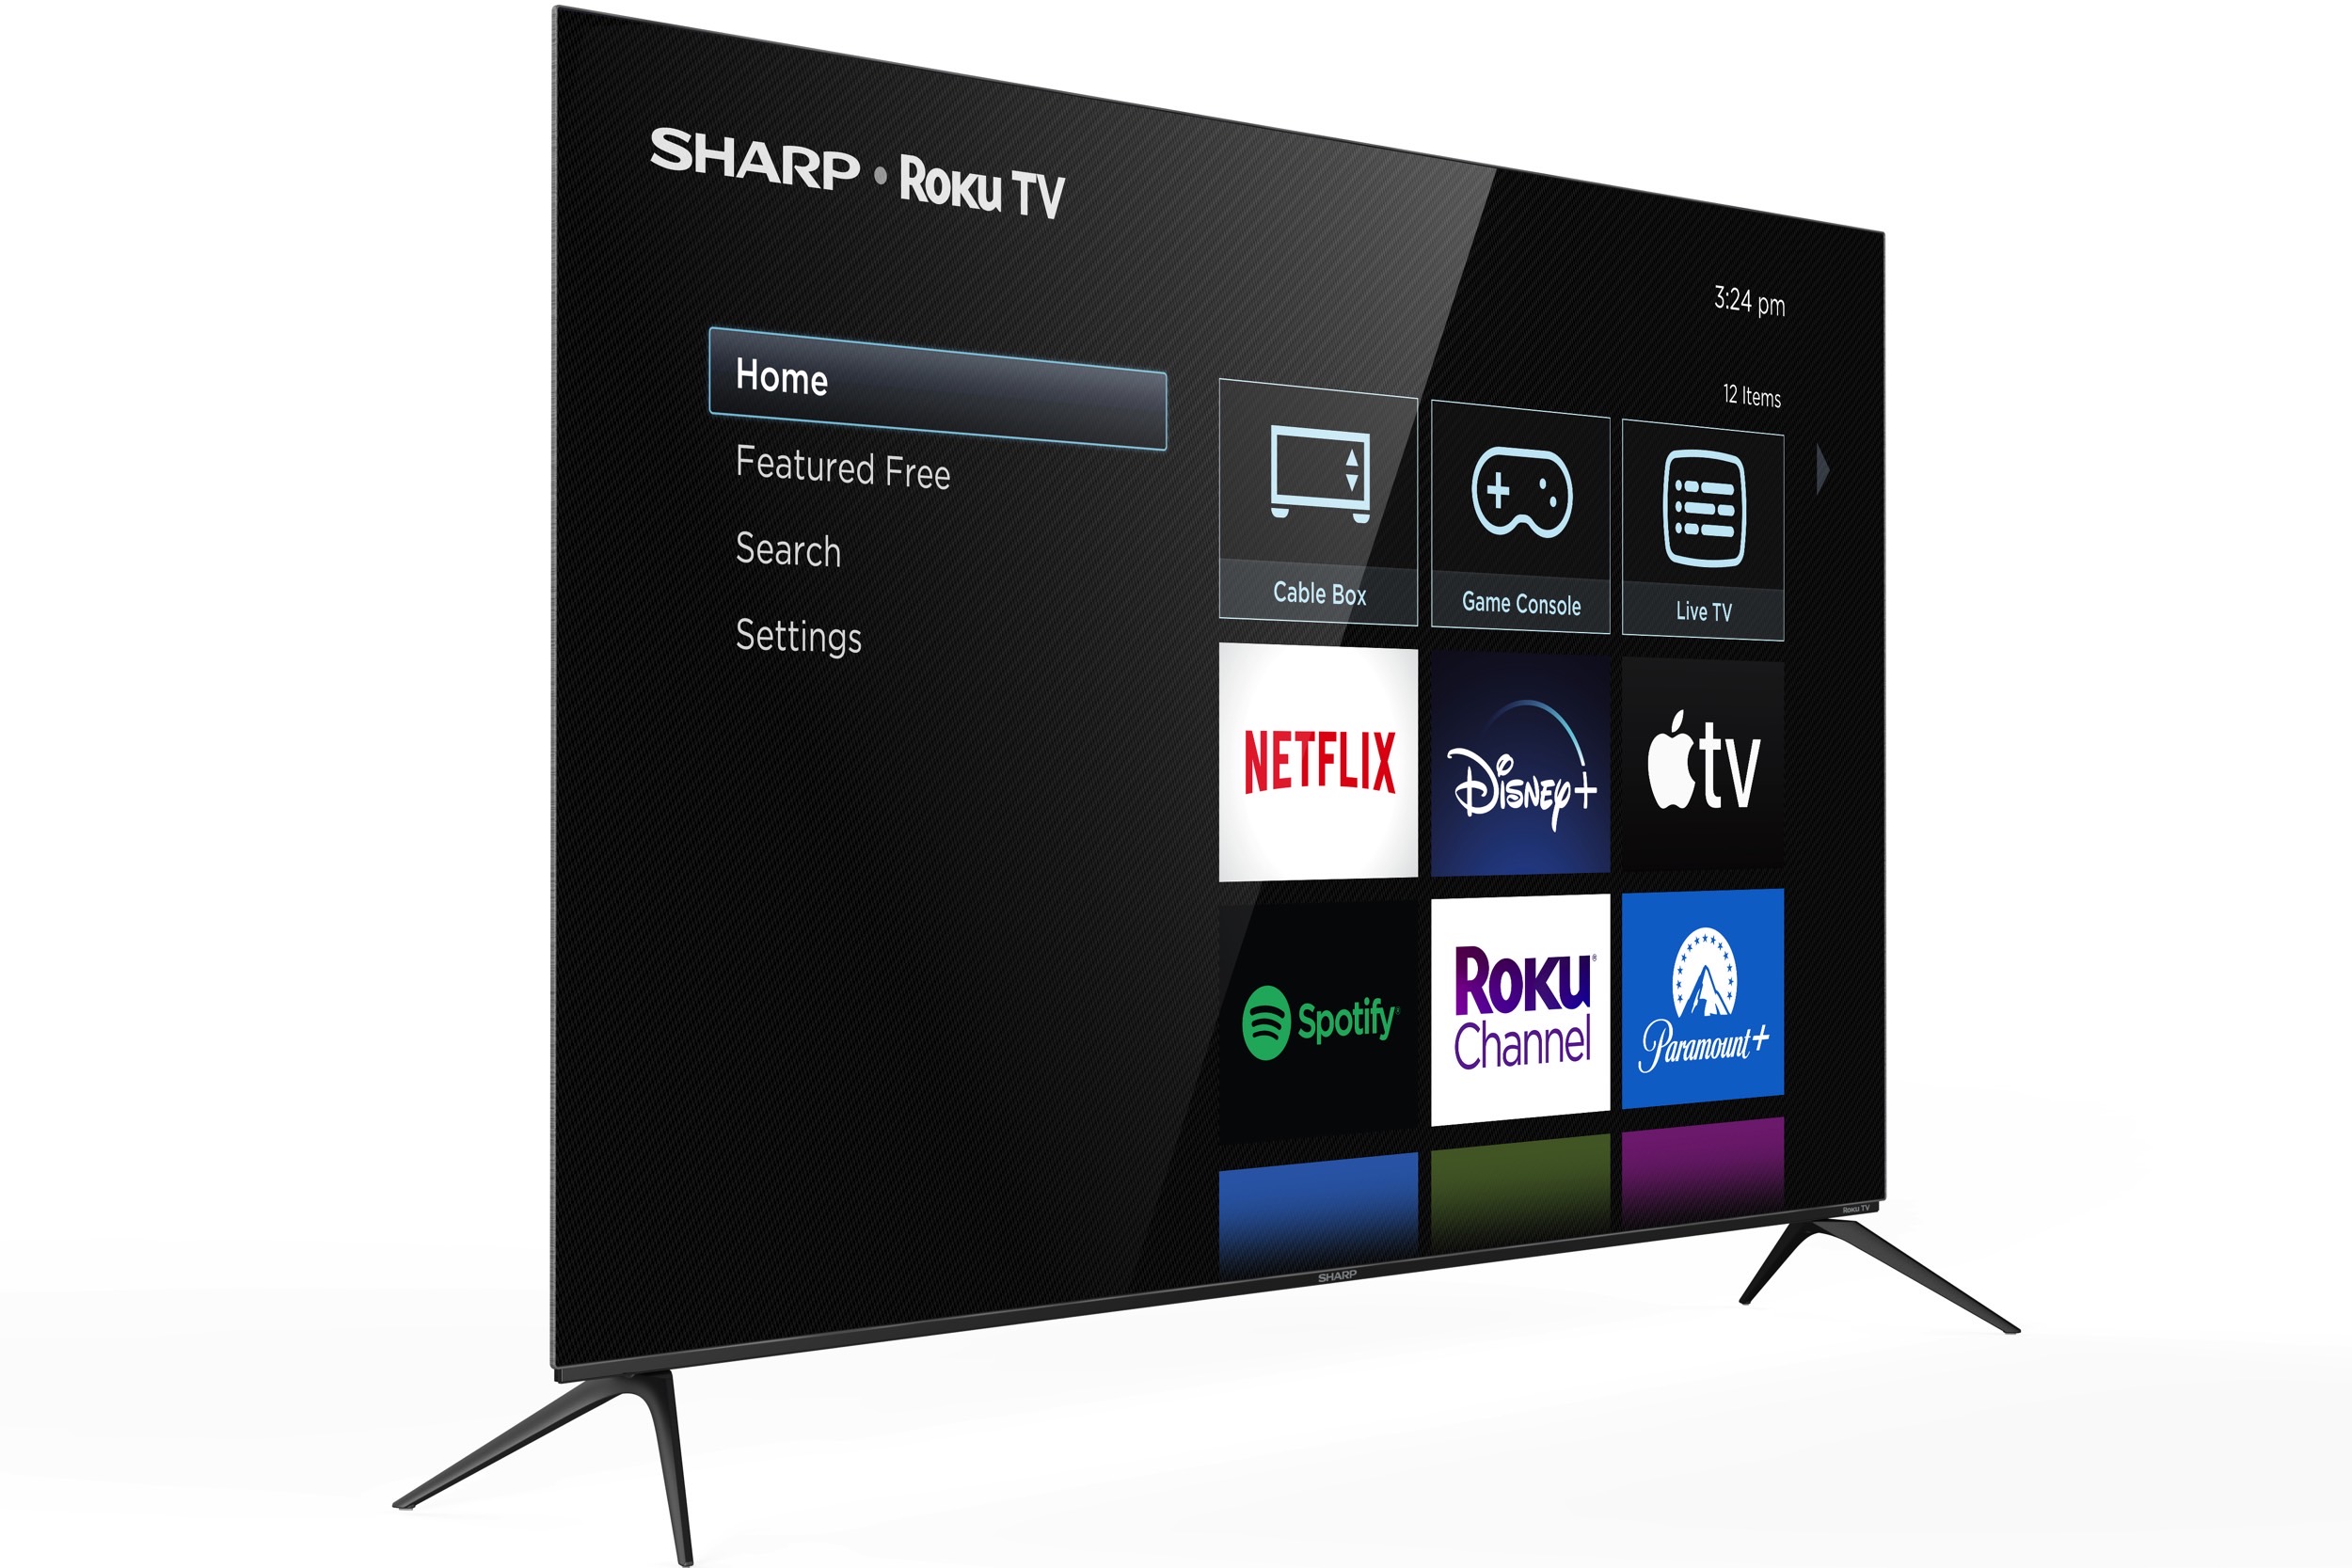 SHARP LAUNCHES THE WORLD'S FIRST OLED 4K UHD TV MODELS EQUIPPED WITH ROKU TV  STREAMING PLATFORM